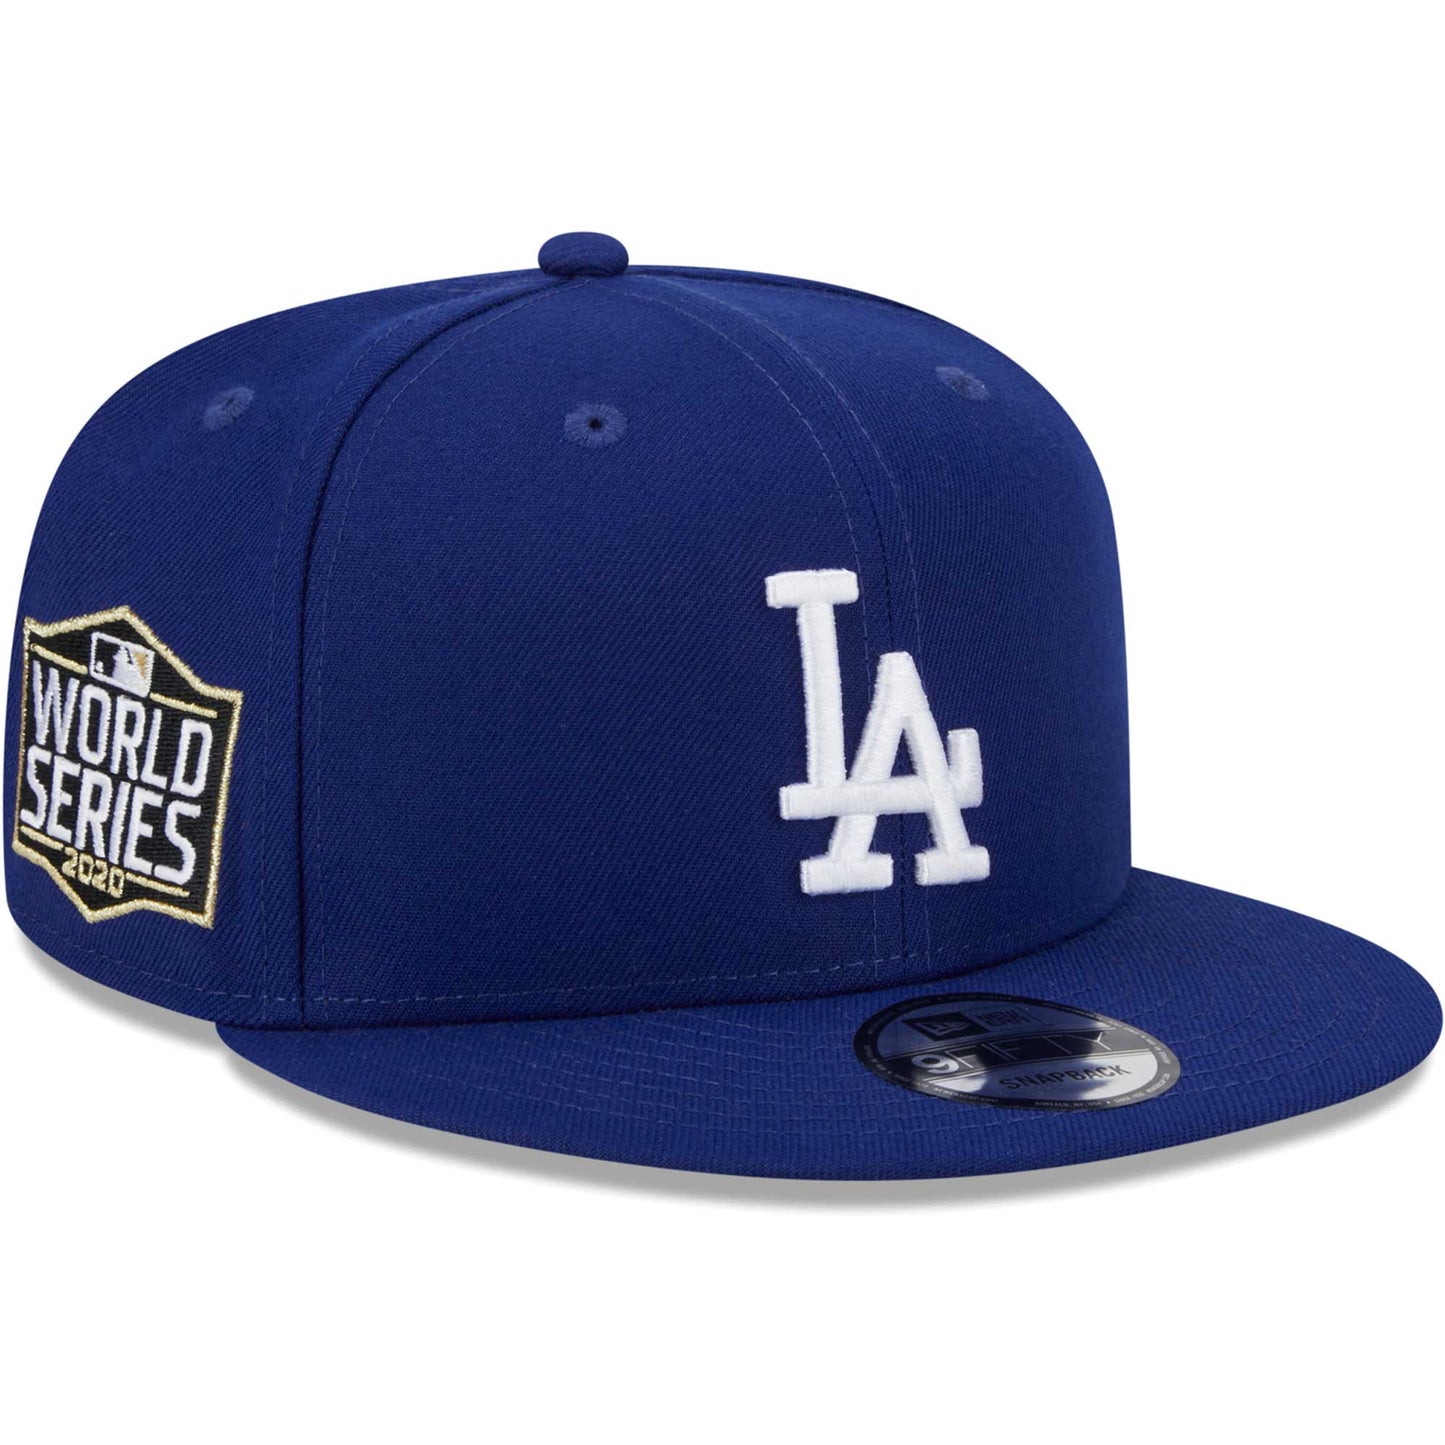 Los Angeles Dodgers New Era 2020 World Series Side Patch 9FIFTY Snapback Hat - Royal